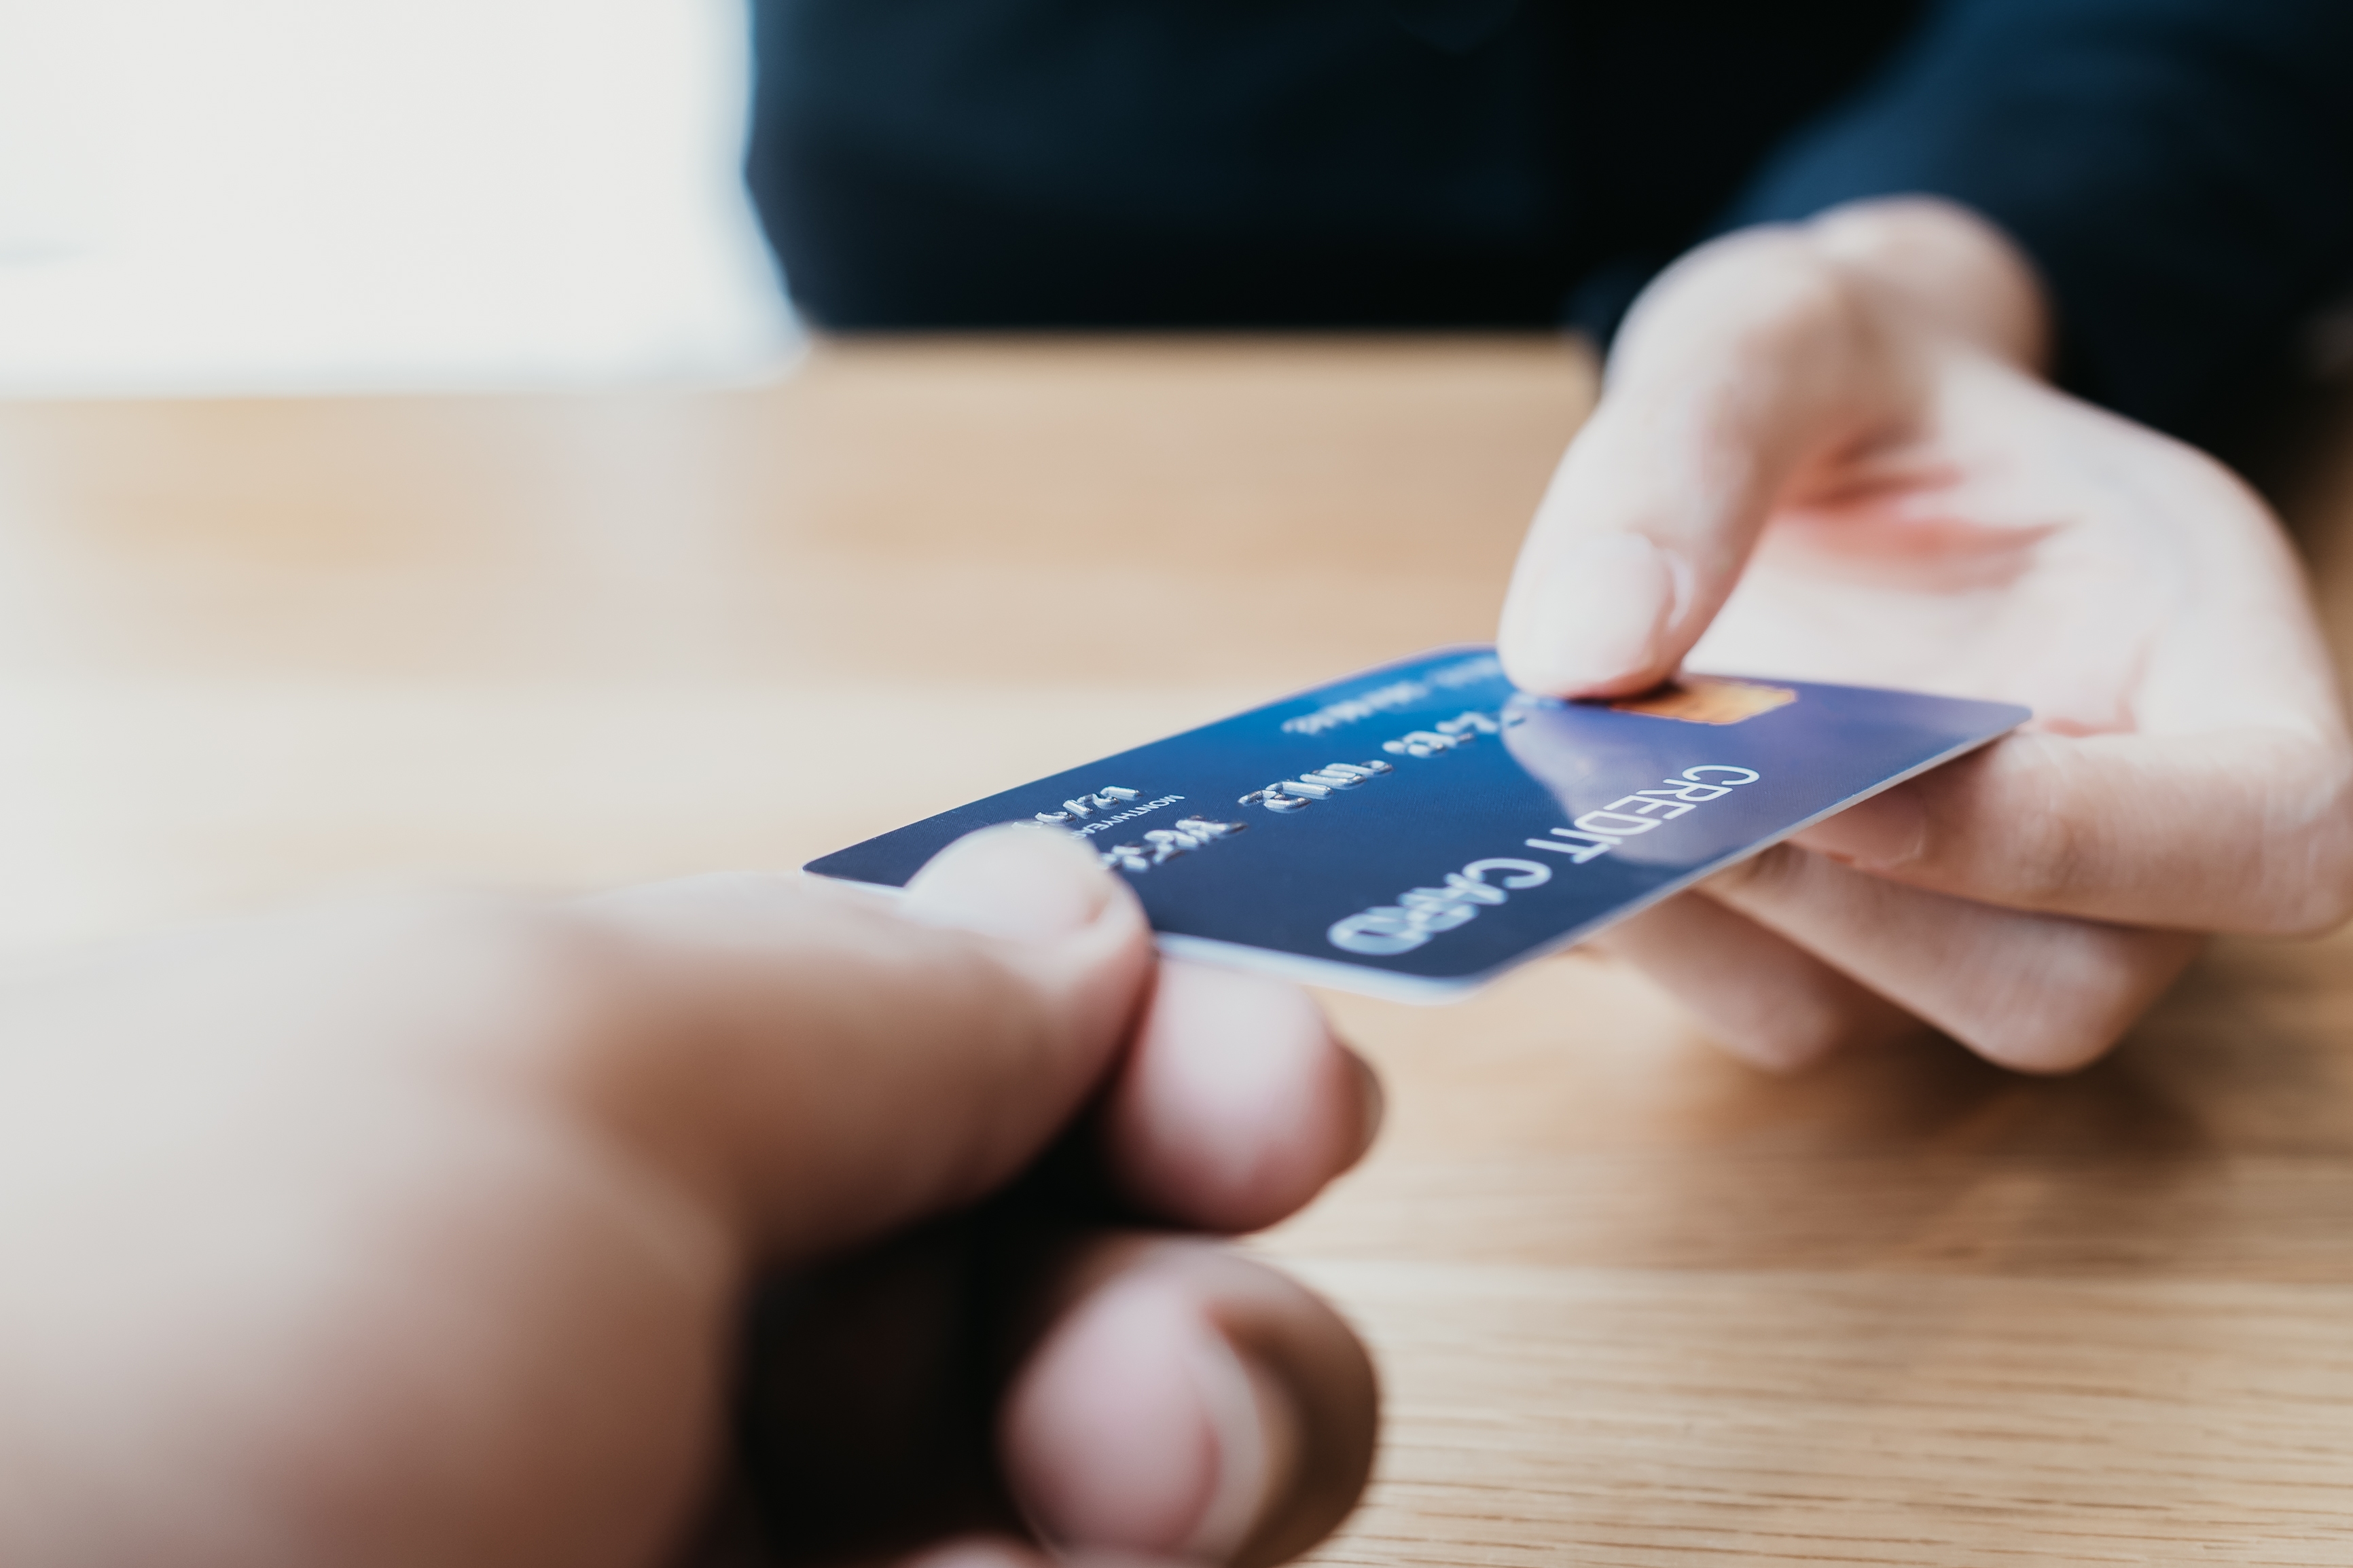 A person handing over a credit card | Source: Shutterstock